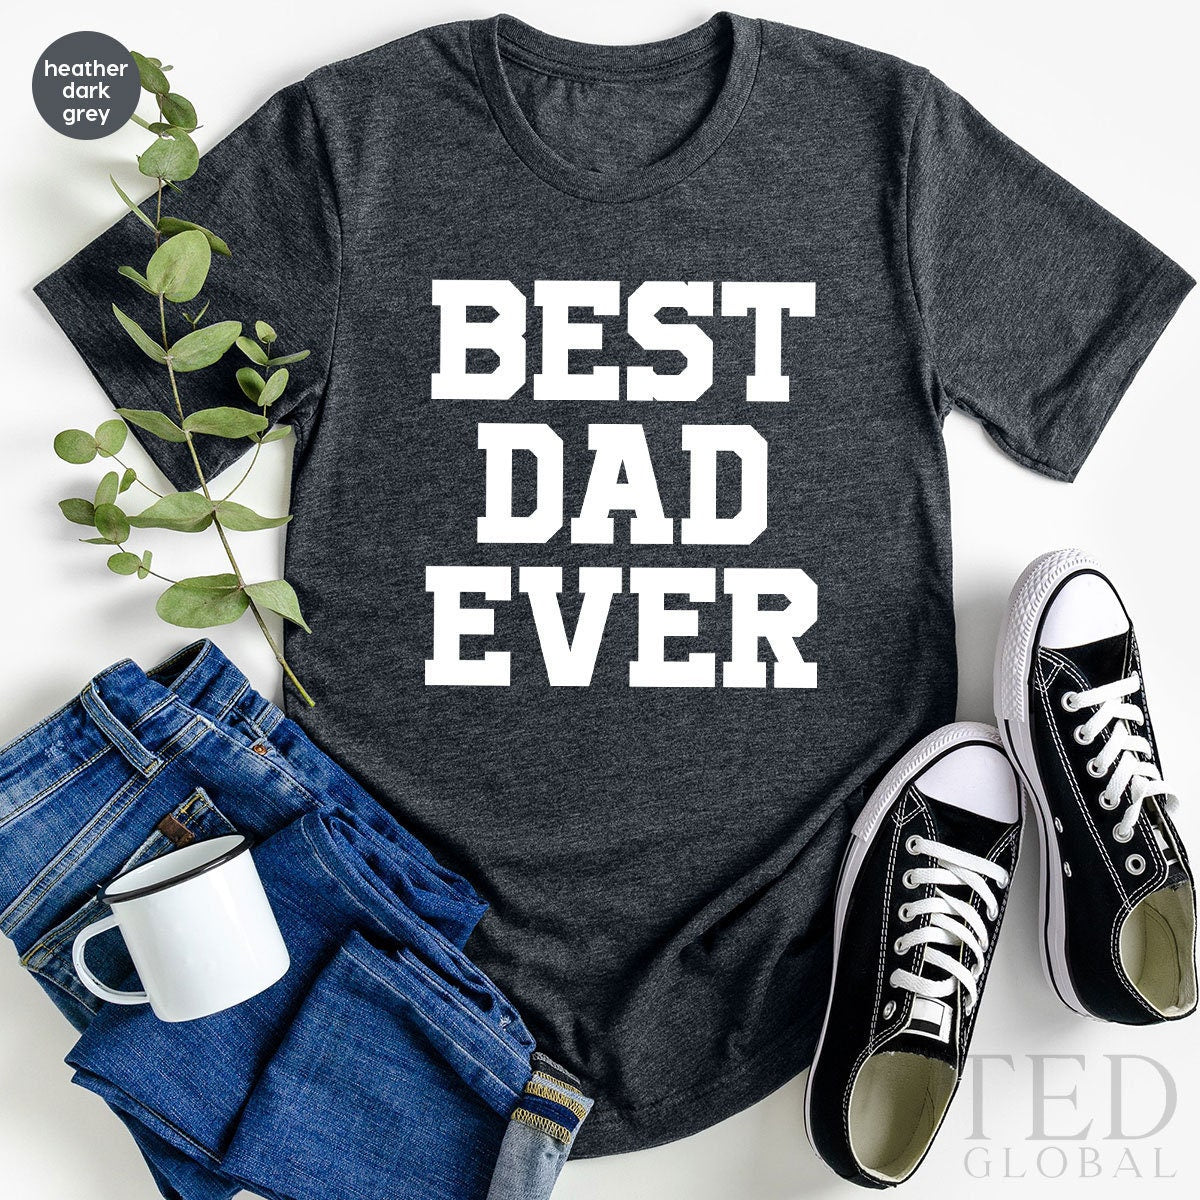 Fathers Day Shirt, Fathers Day Gift, New Dad Gift, Best Dad Ever, Best Dad Shirt, Dad to Be Shirt